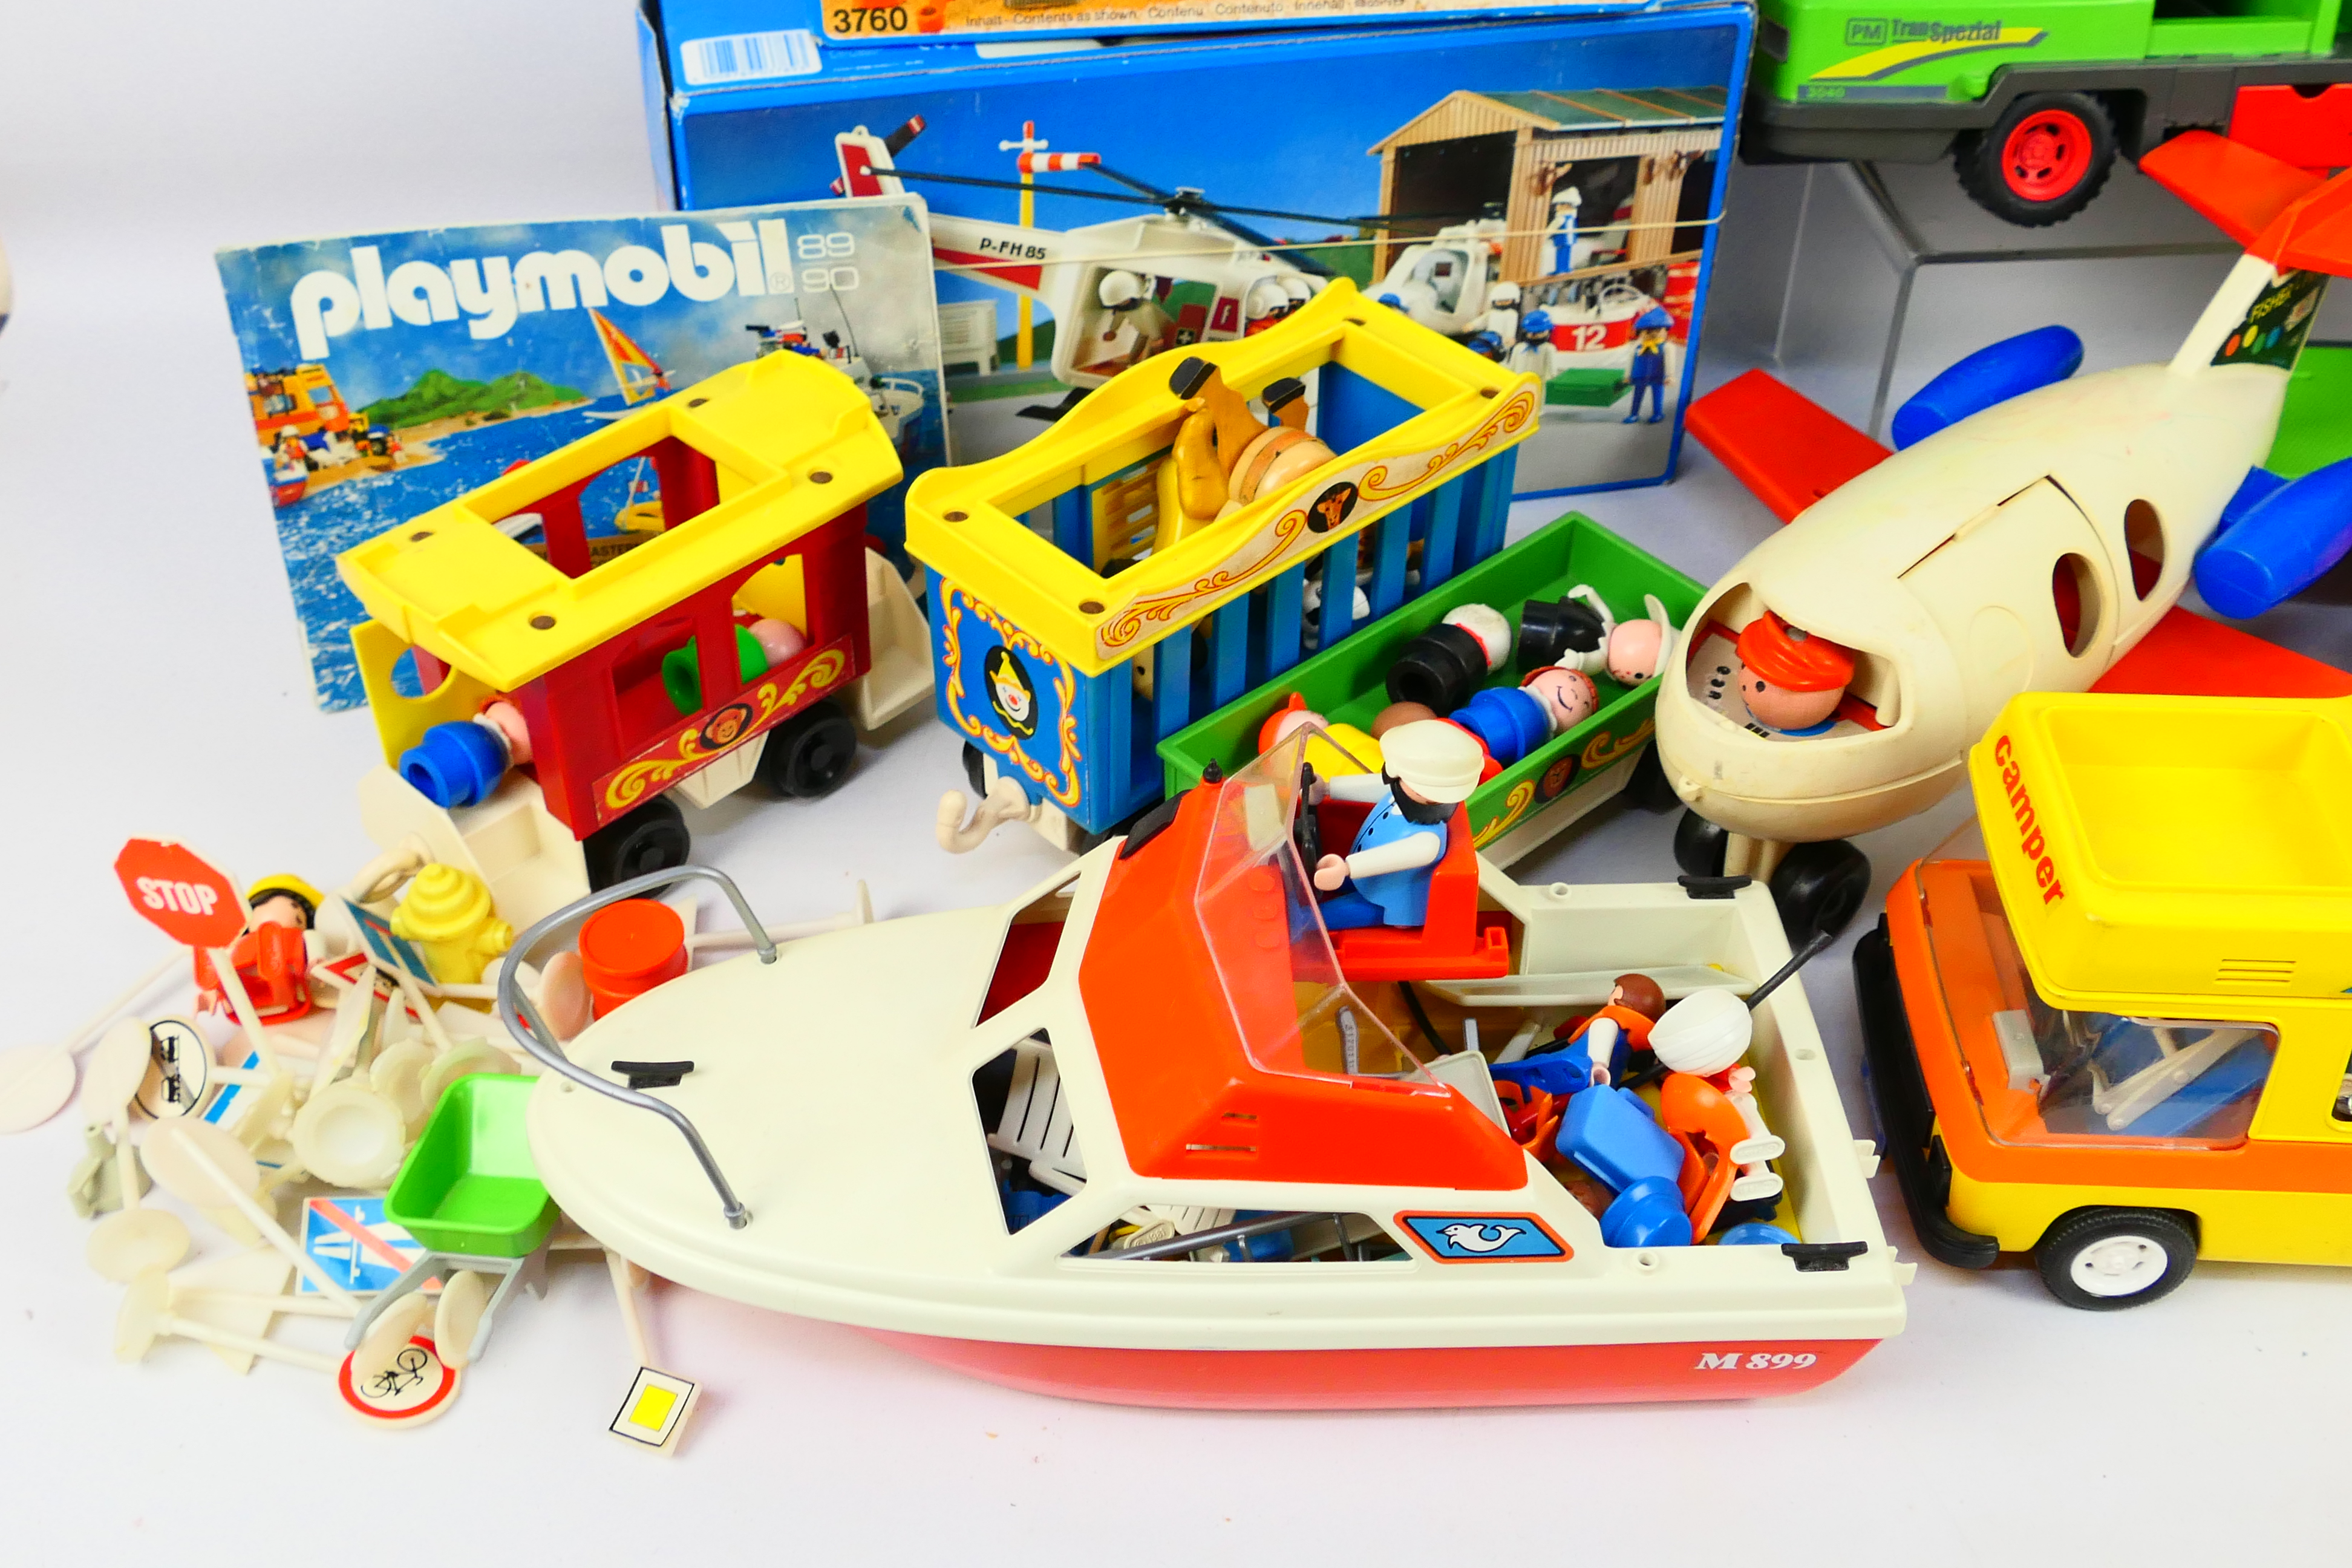 Fisher Price - Playmobil - A collection of vintage Fisher Price toys and 2 x boxed Playmobil sets, - Bild 4 aus 5